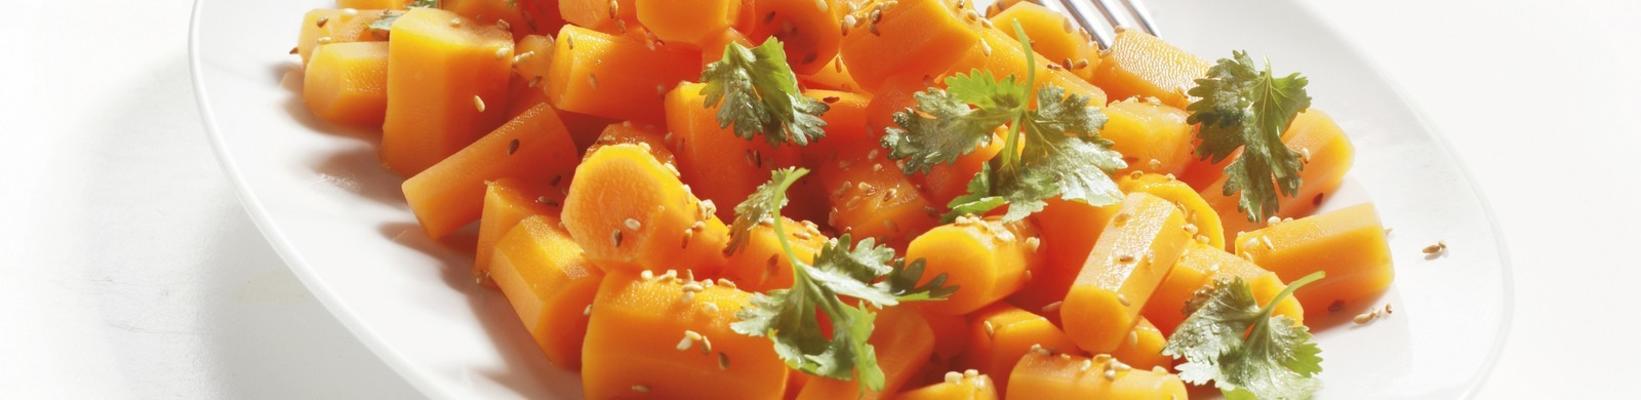 stir-fried carrot with ginger and sesame